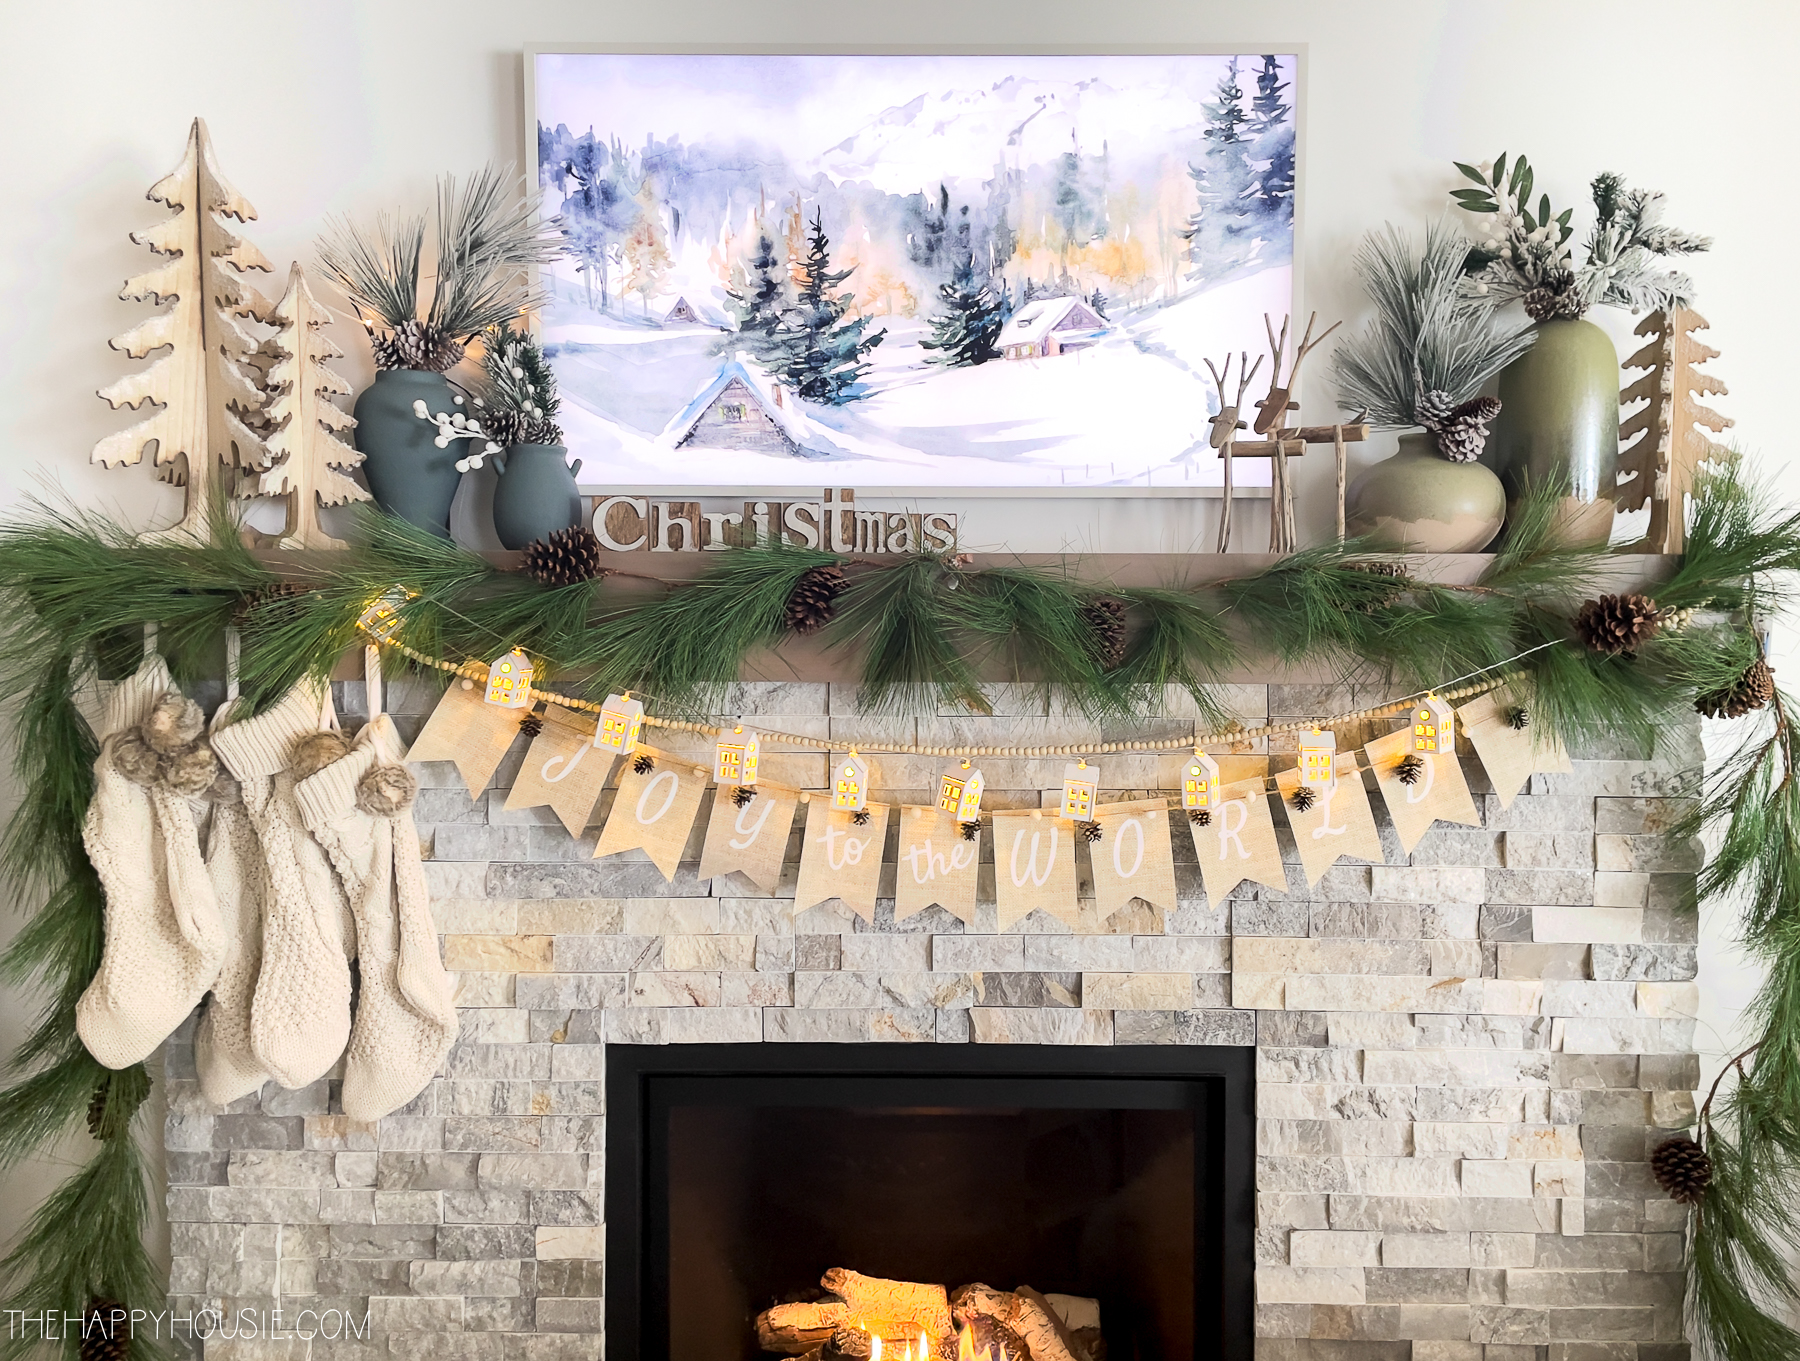 Christmas banners are strung across the fireplace.